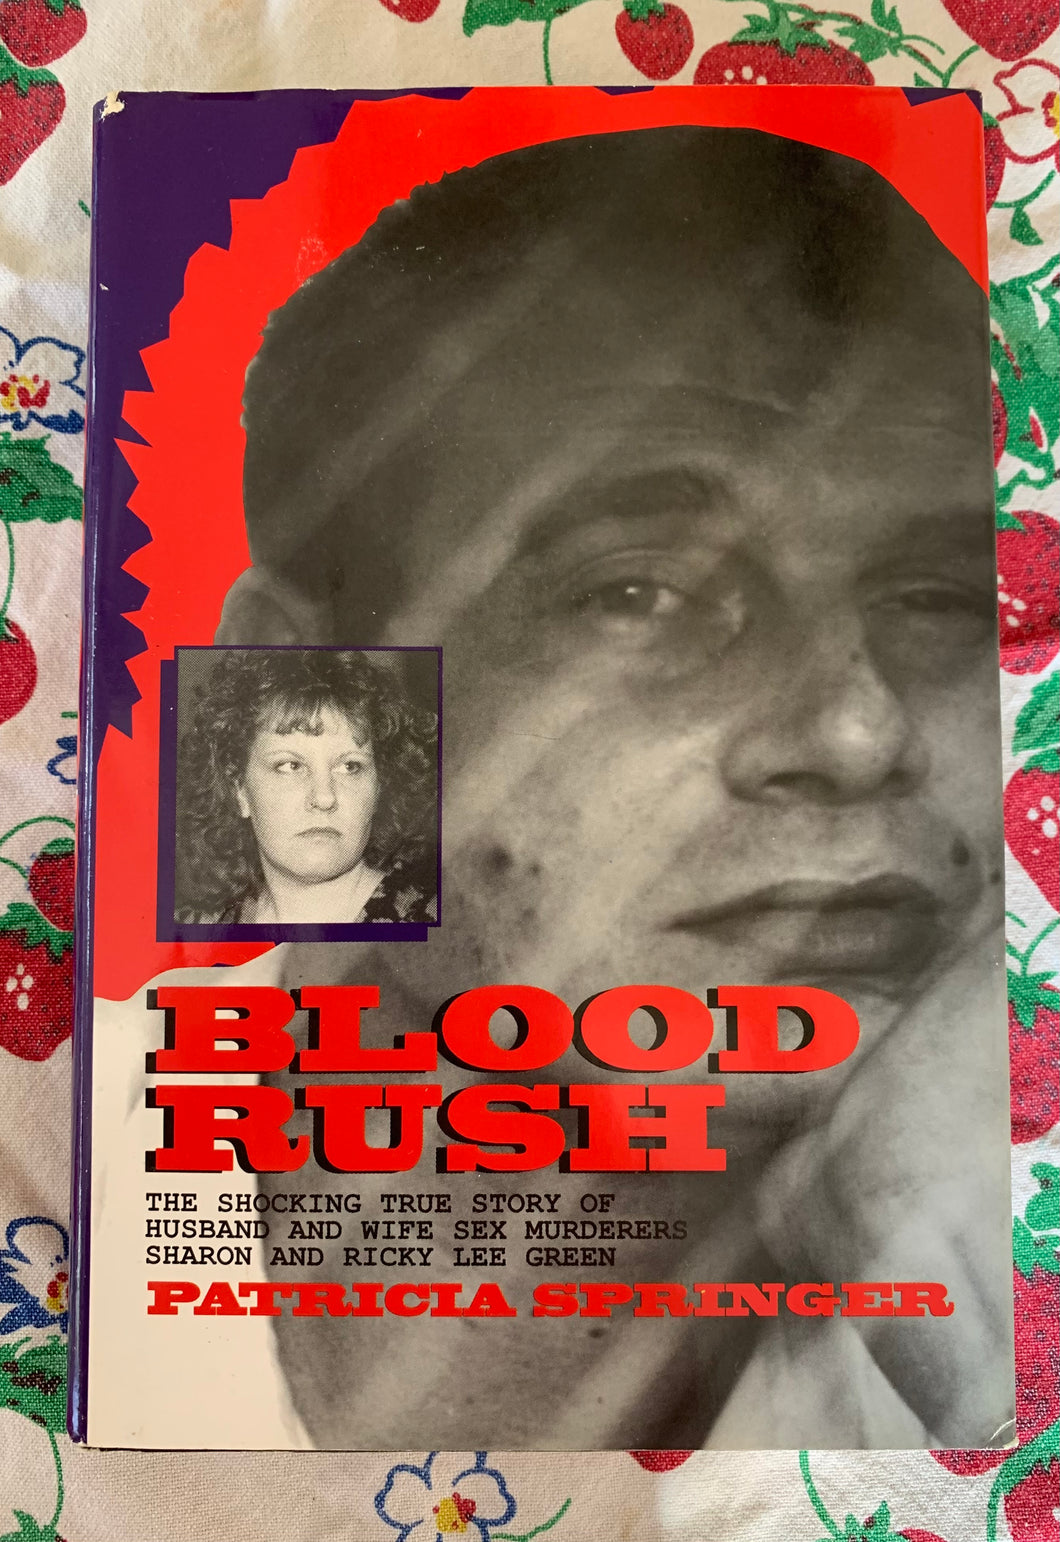 Blood Rush: The Shocking True Story Of Husband And Wife Sex Murderers Sharon And Ricky Lee Green